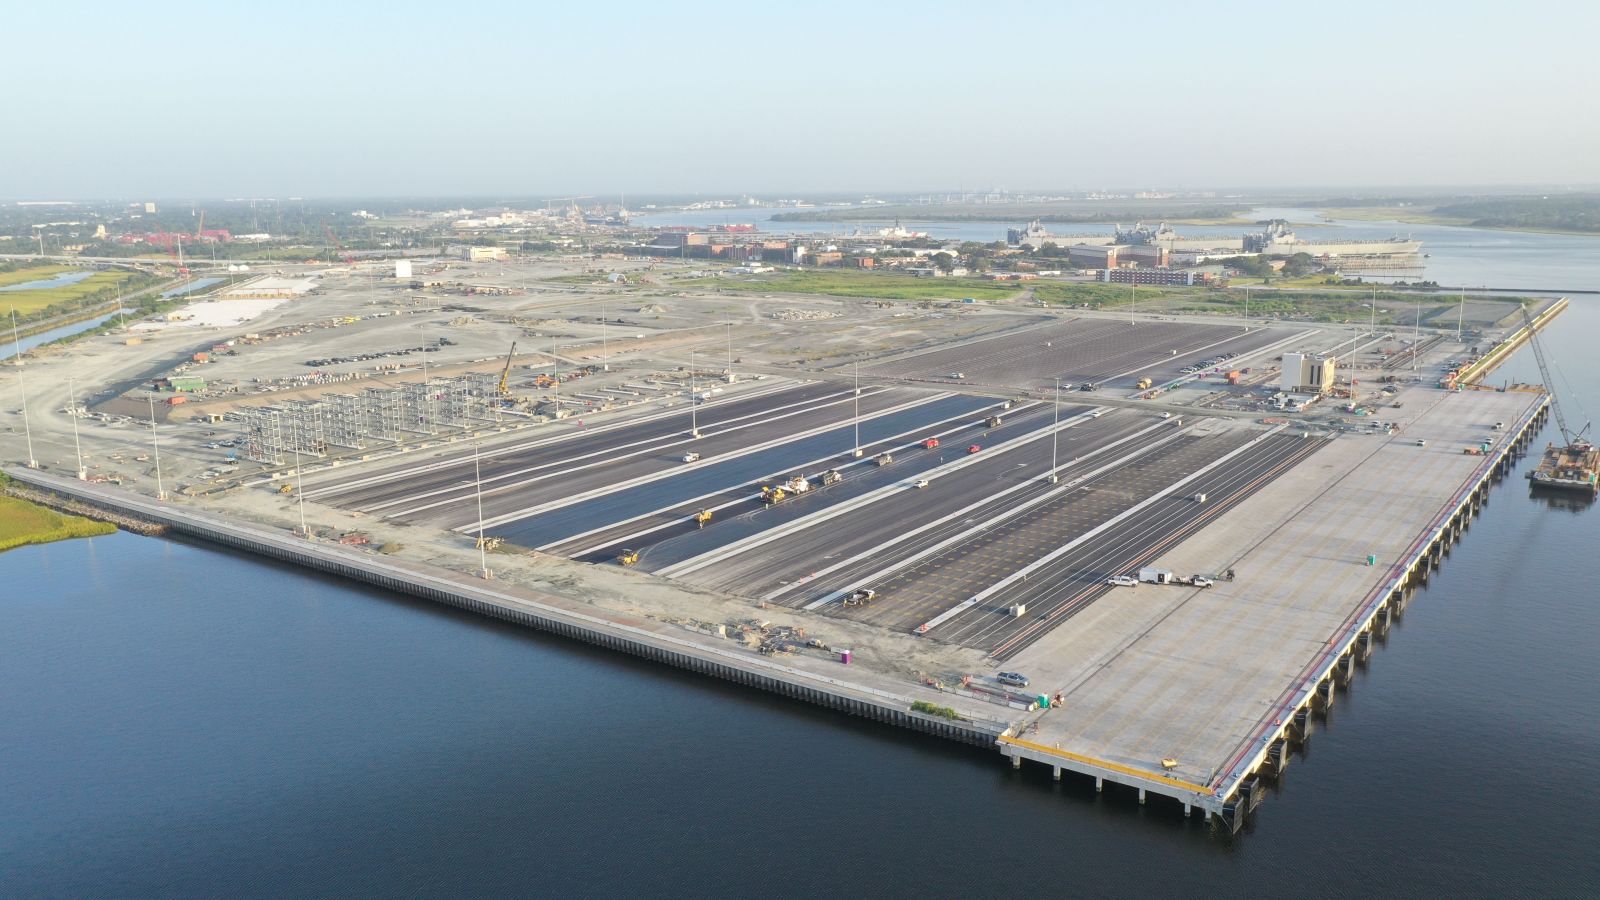 The National Labor Relations Board agreed with a complaint filed by the S.C. Ports Authority and the S.C. Attorney General against the longshoremen and their alliance, which was seeking to use only union labor at the new Hugh K. Leatherman Sr. Terminal, which set to open next month. (Photo/S.C. Ports Authority)